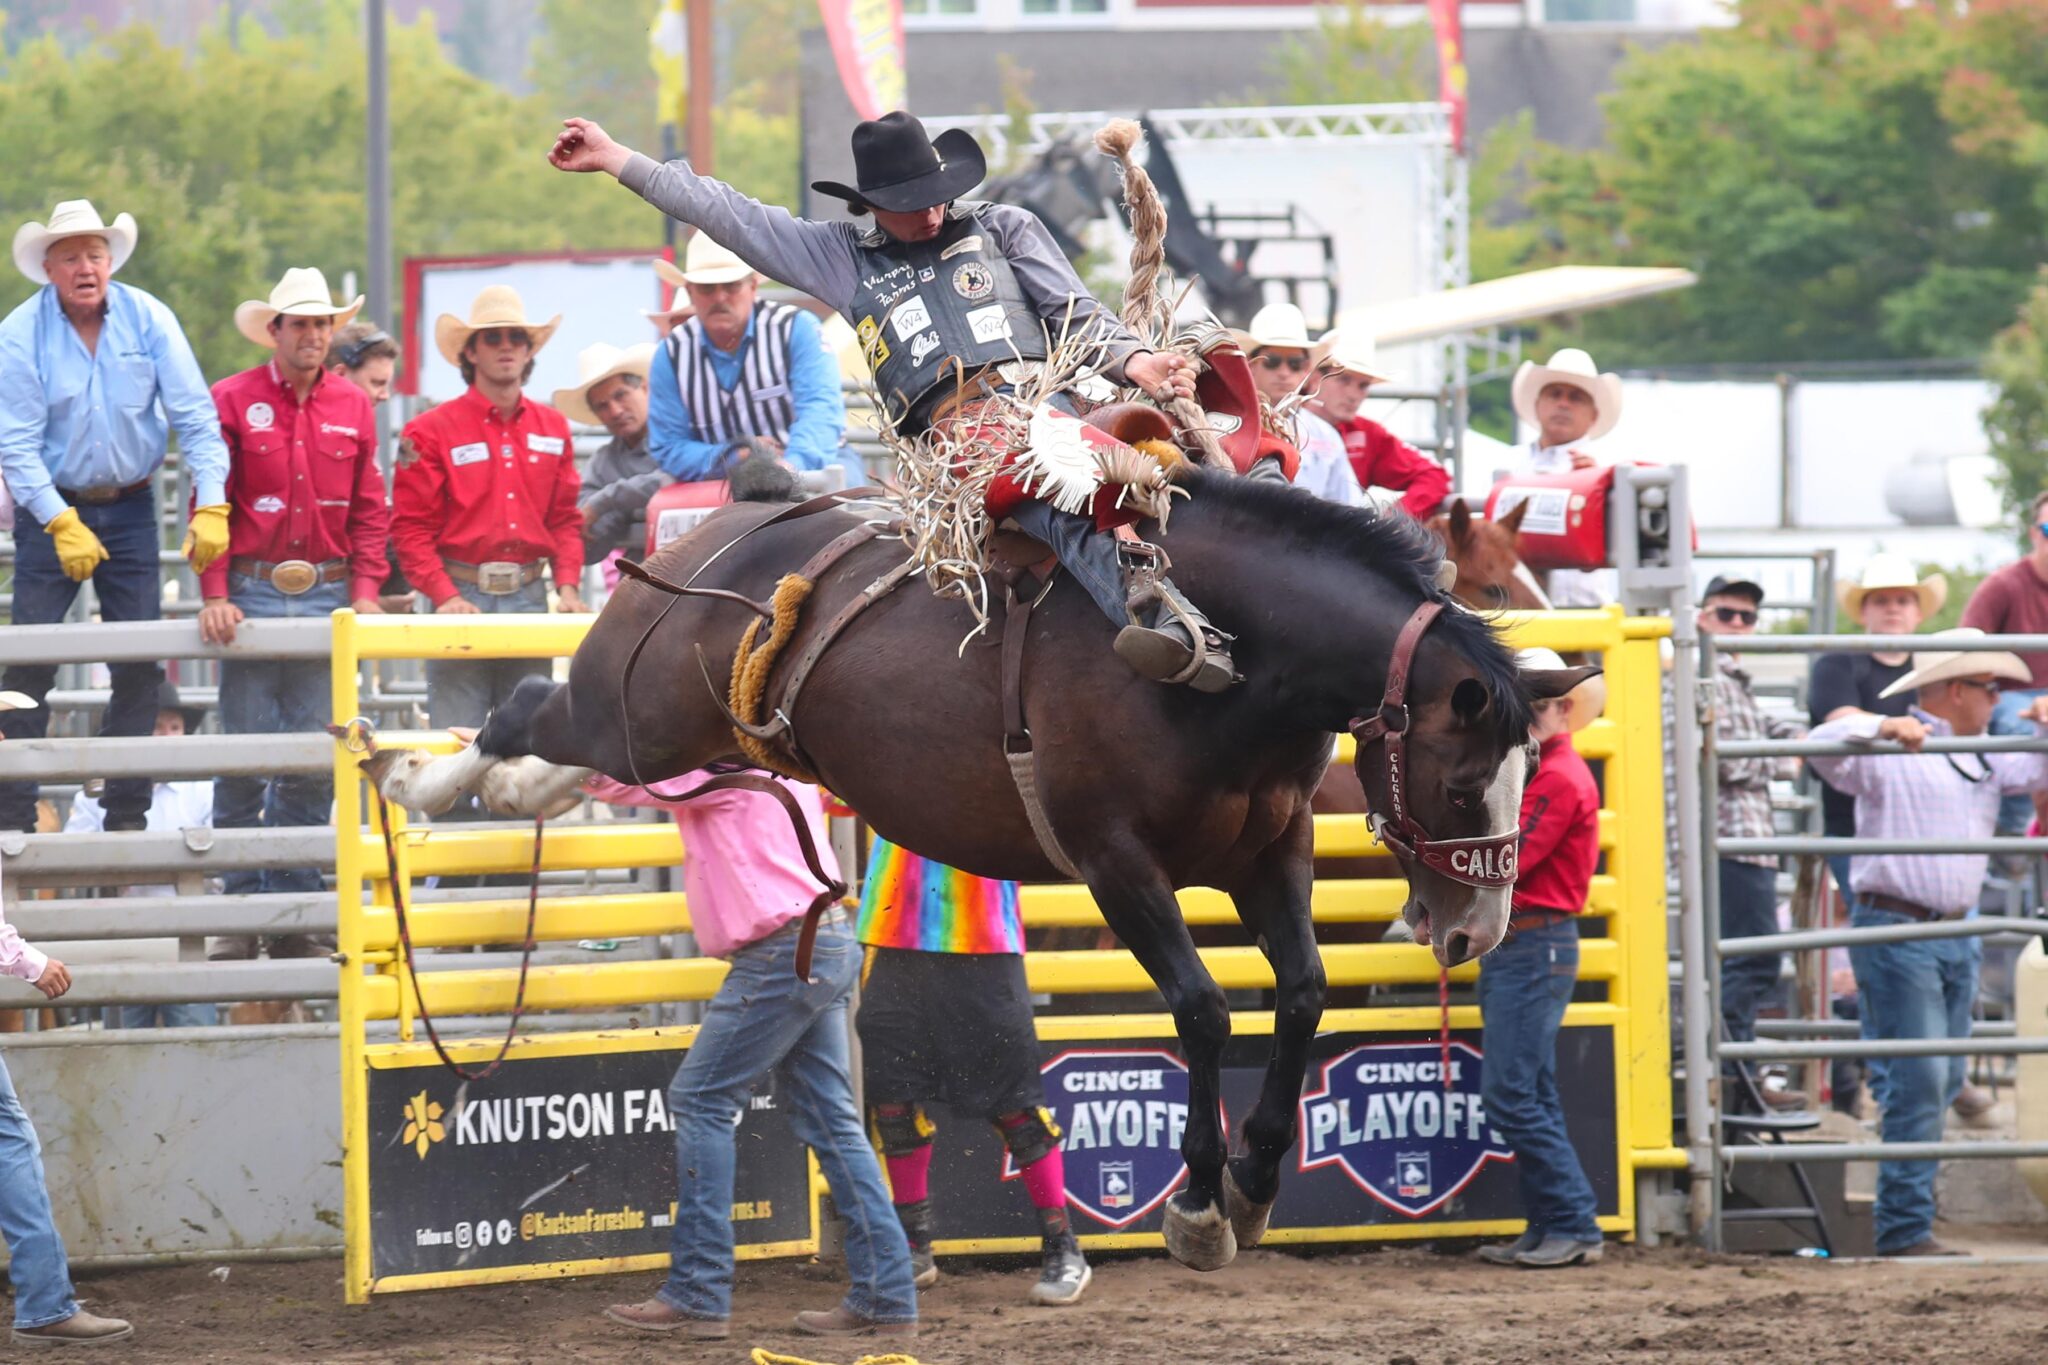 Cinch Playoffs champions crowned at Puyallup Rodeo VOICE of the Valley